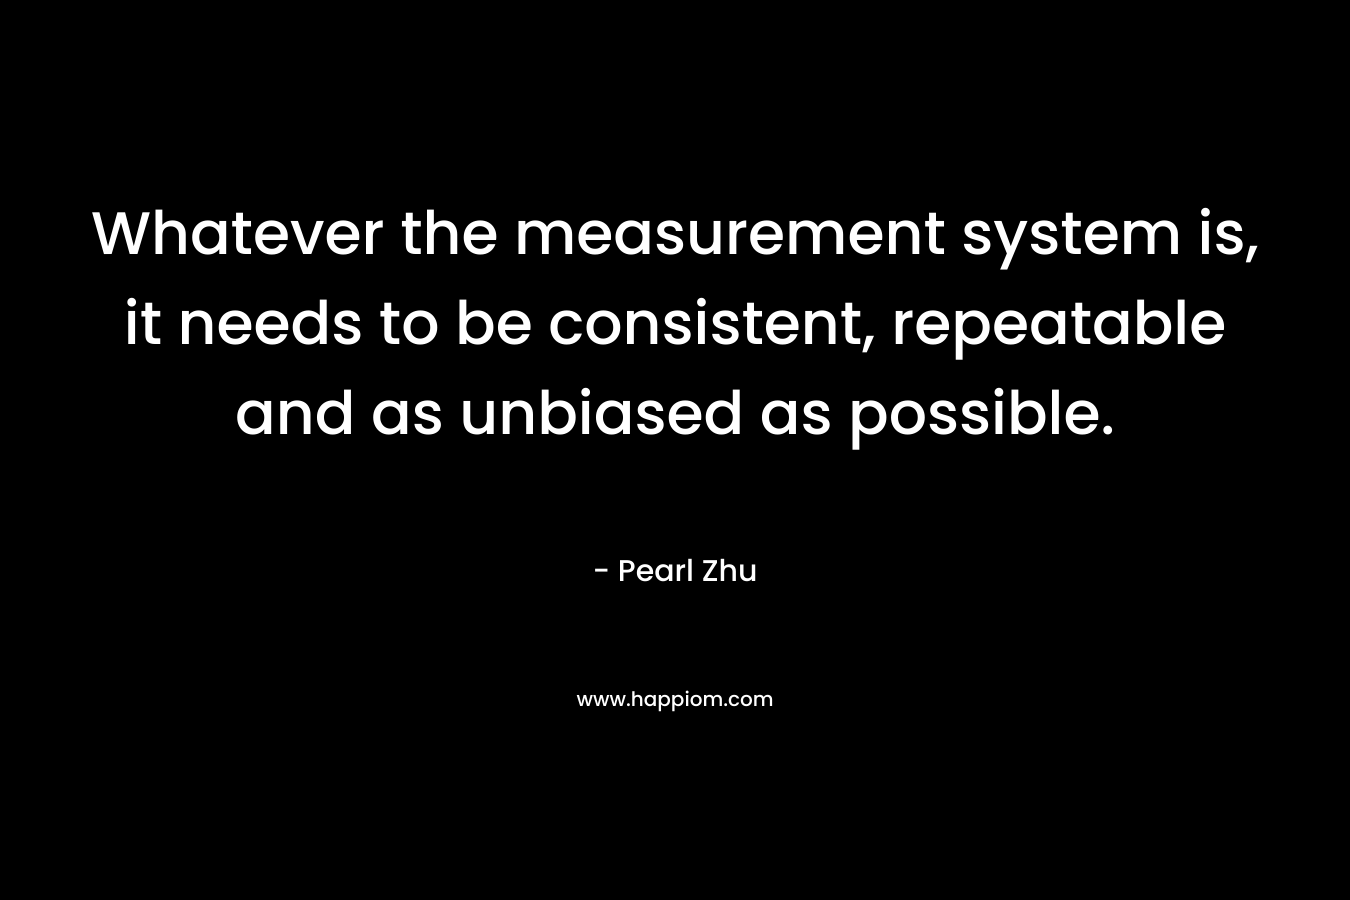 Whatever the measurement system is, it needs to be consistent, repeatable and as unbiased as possible. – Pearl Zhu